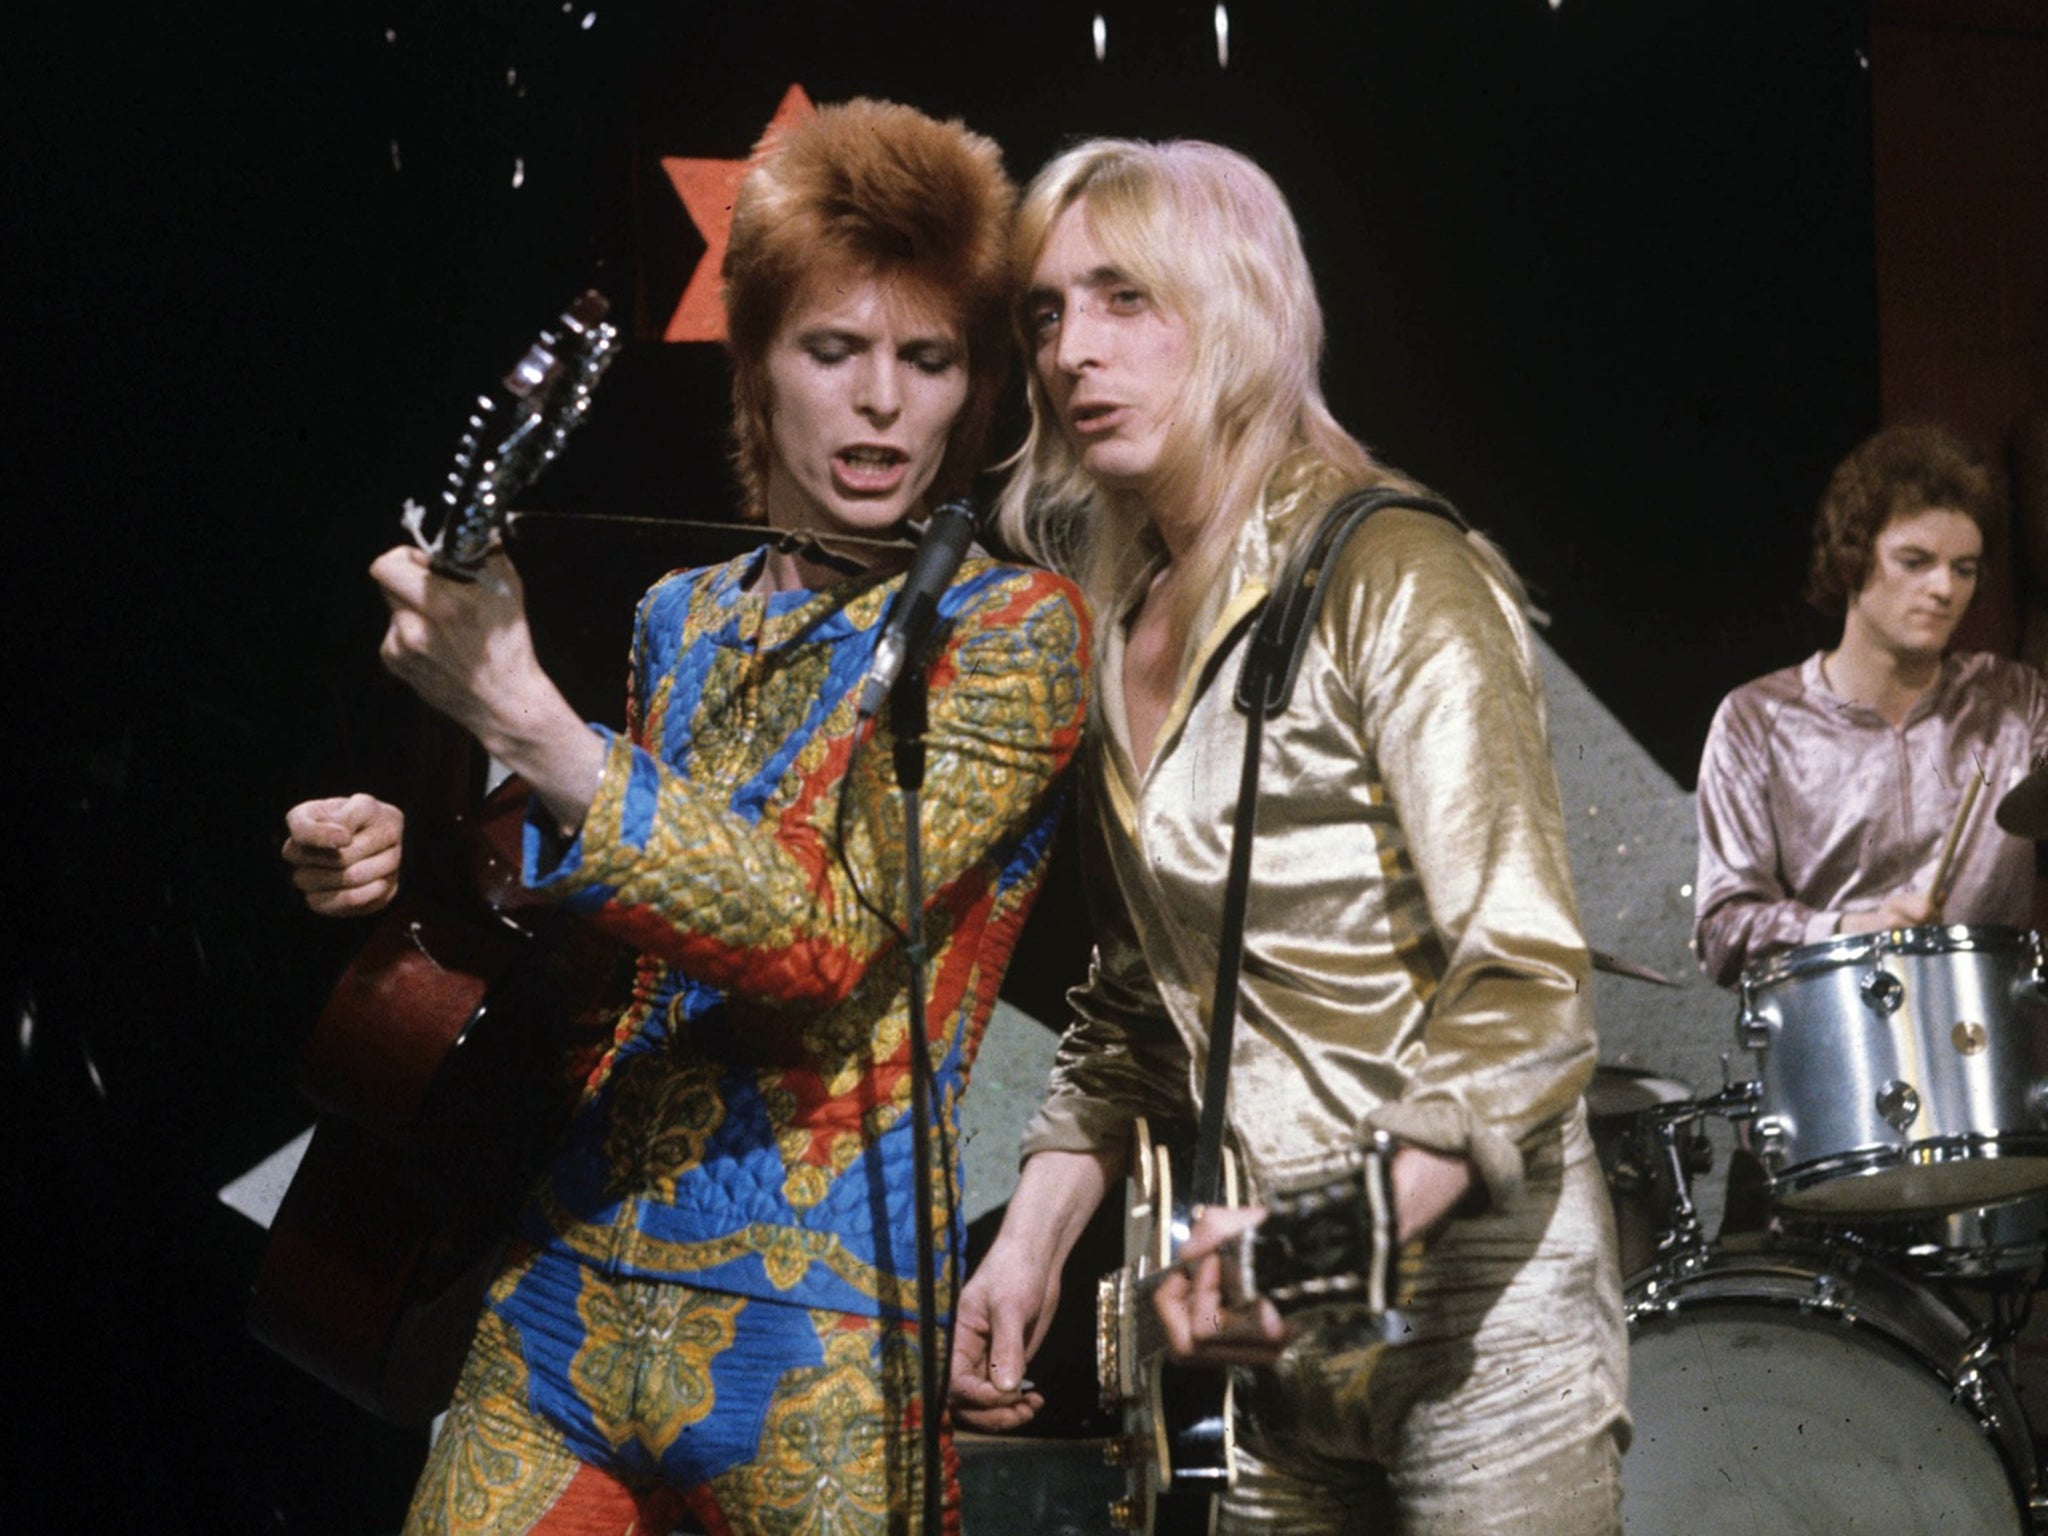 Bowie on stage with Mick Ronson in 1972